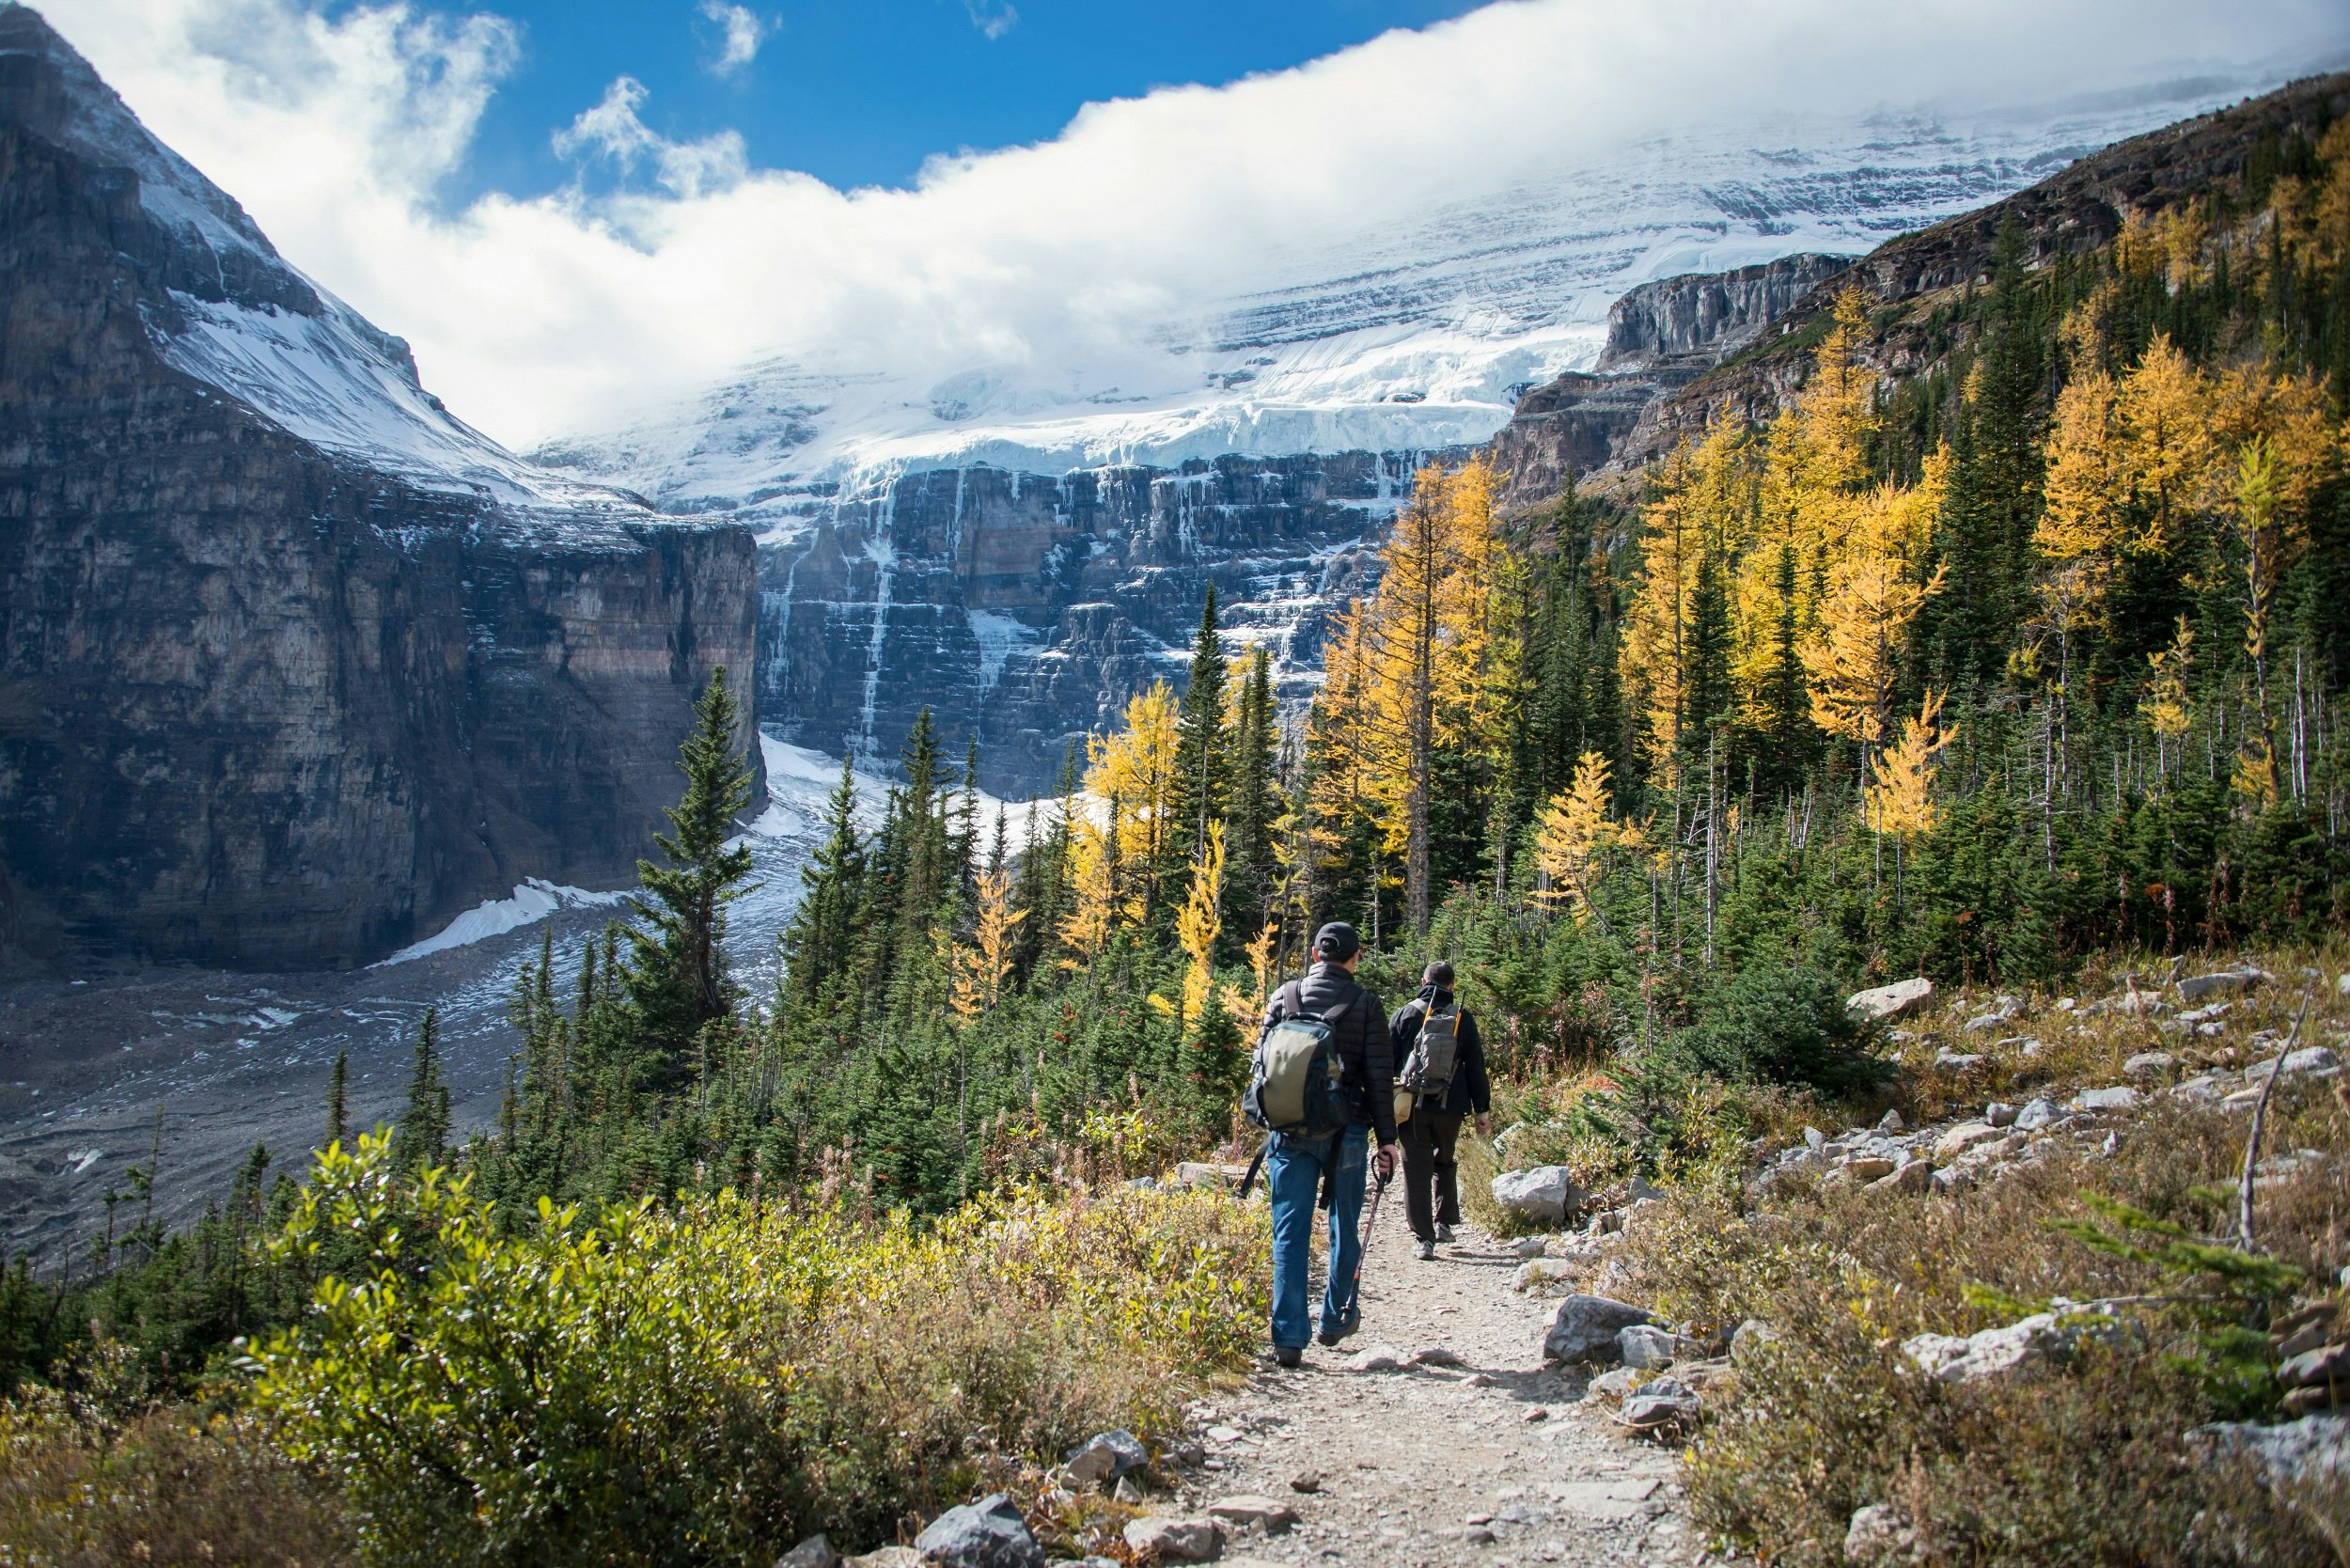 A couple of hikers walk away from the camera on a rough rock-and-gravel trail towards some trees; to the left and distance is a dramatic, cliff-lined valley that leads up to snow covered peaks of the Rockies.